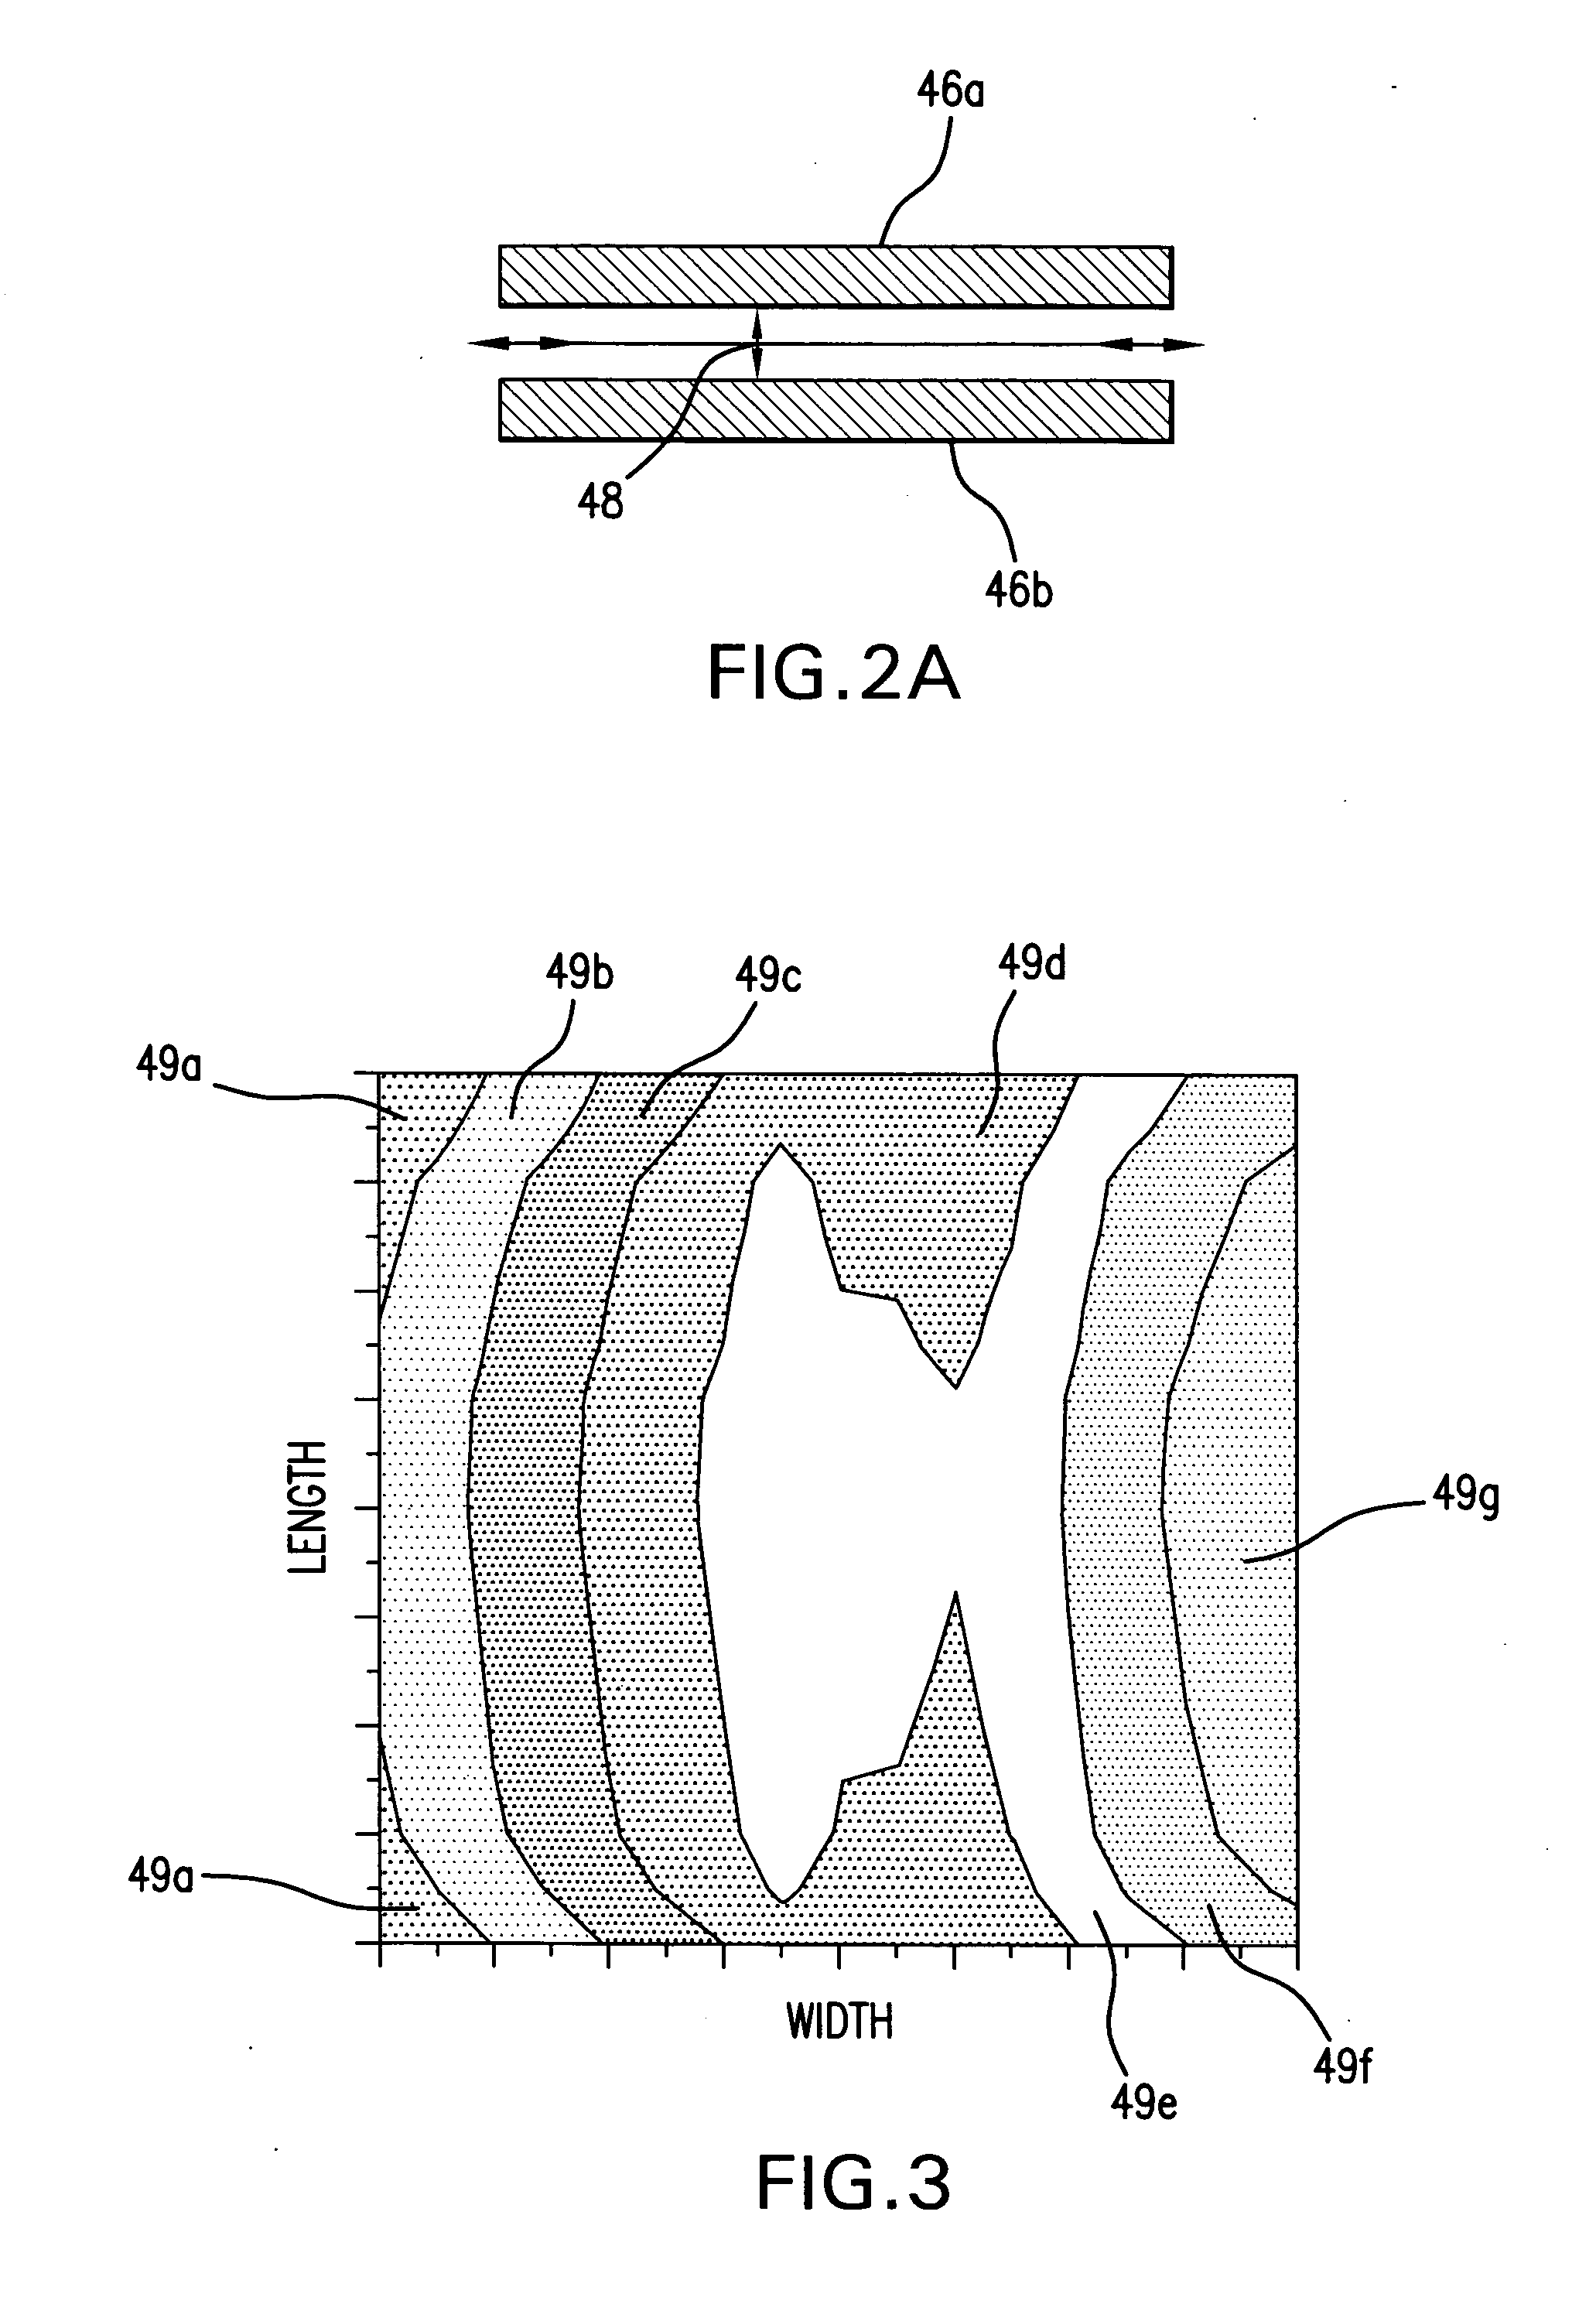 Active bandwidth control for a laser